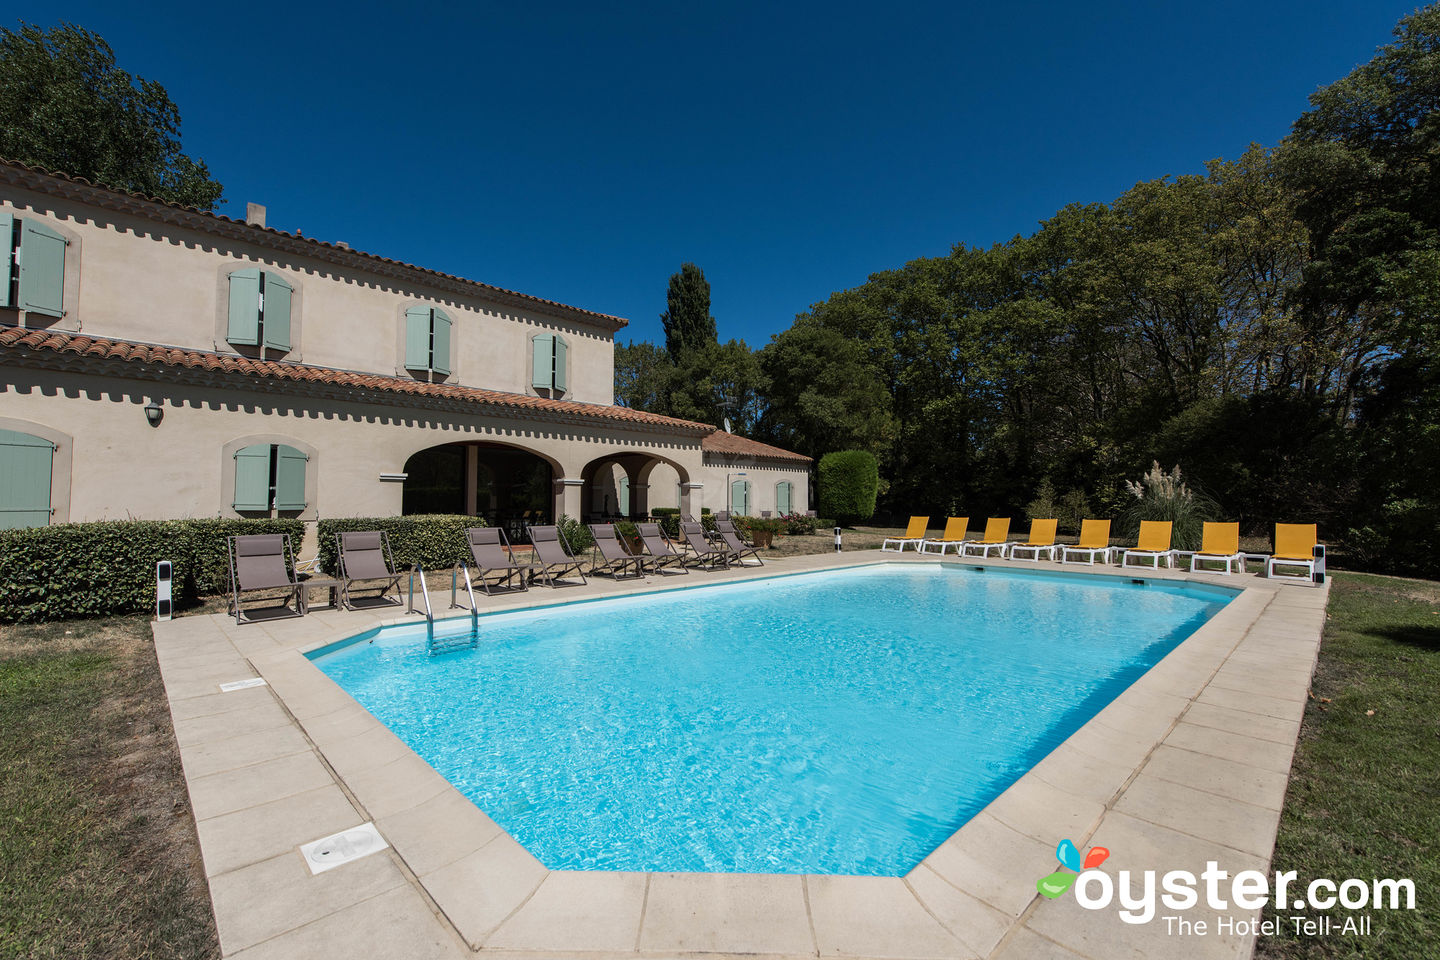 Hôtel La Bastide Saint Martin Review: What To REALLY Expect If You Stay